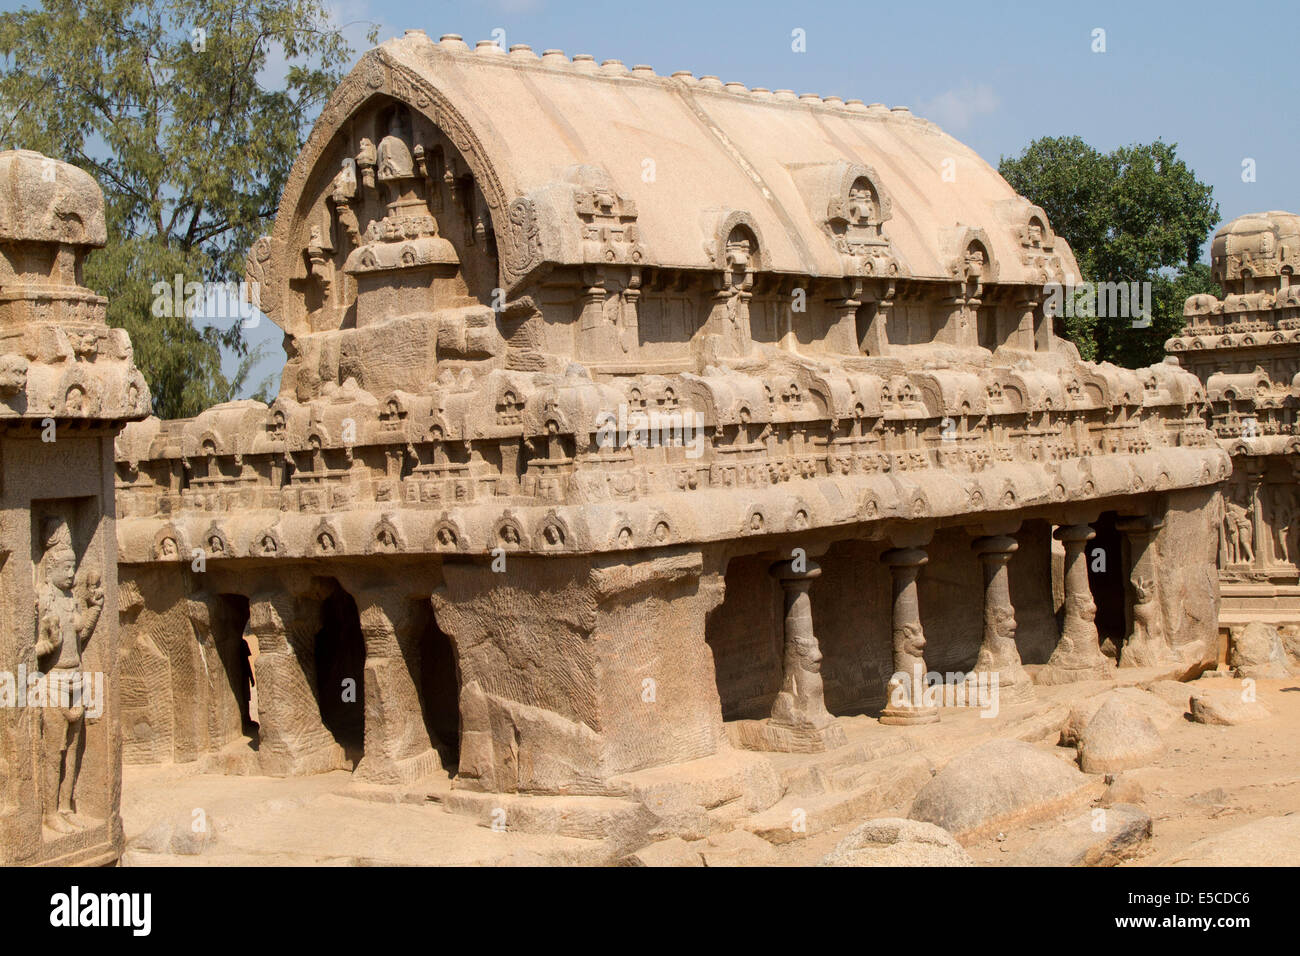 Rathas, also called pagodas,are small shrines chiseled out of solid stone boulders in the form of temple chariots eith Bhima Rat Stock Photo